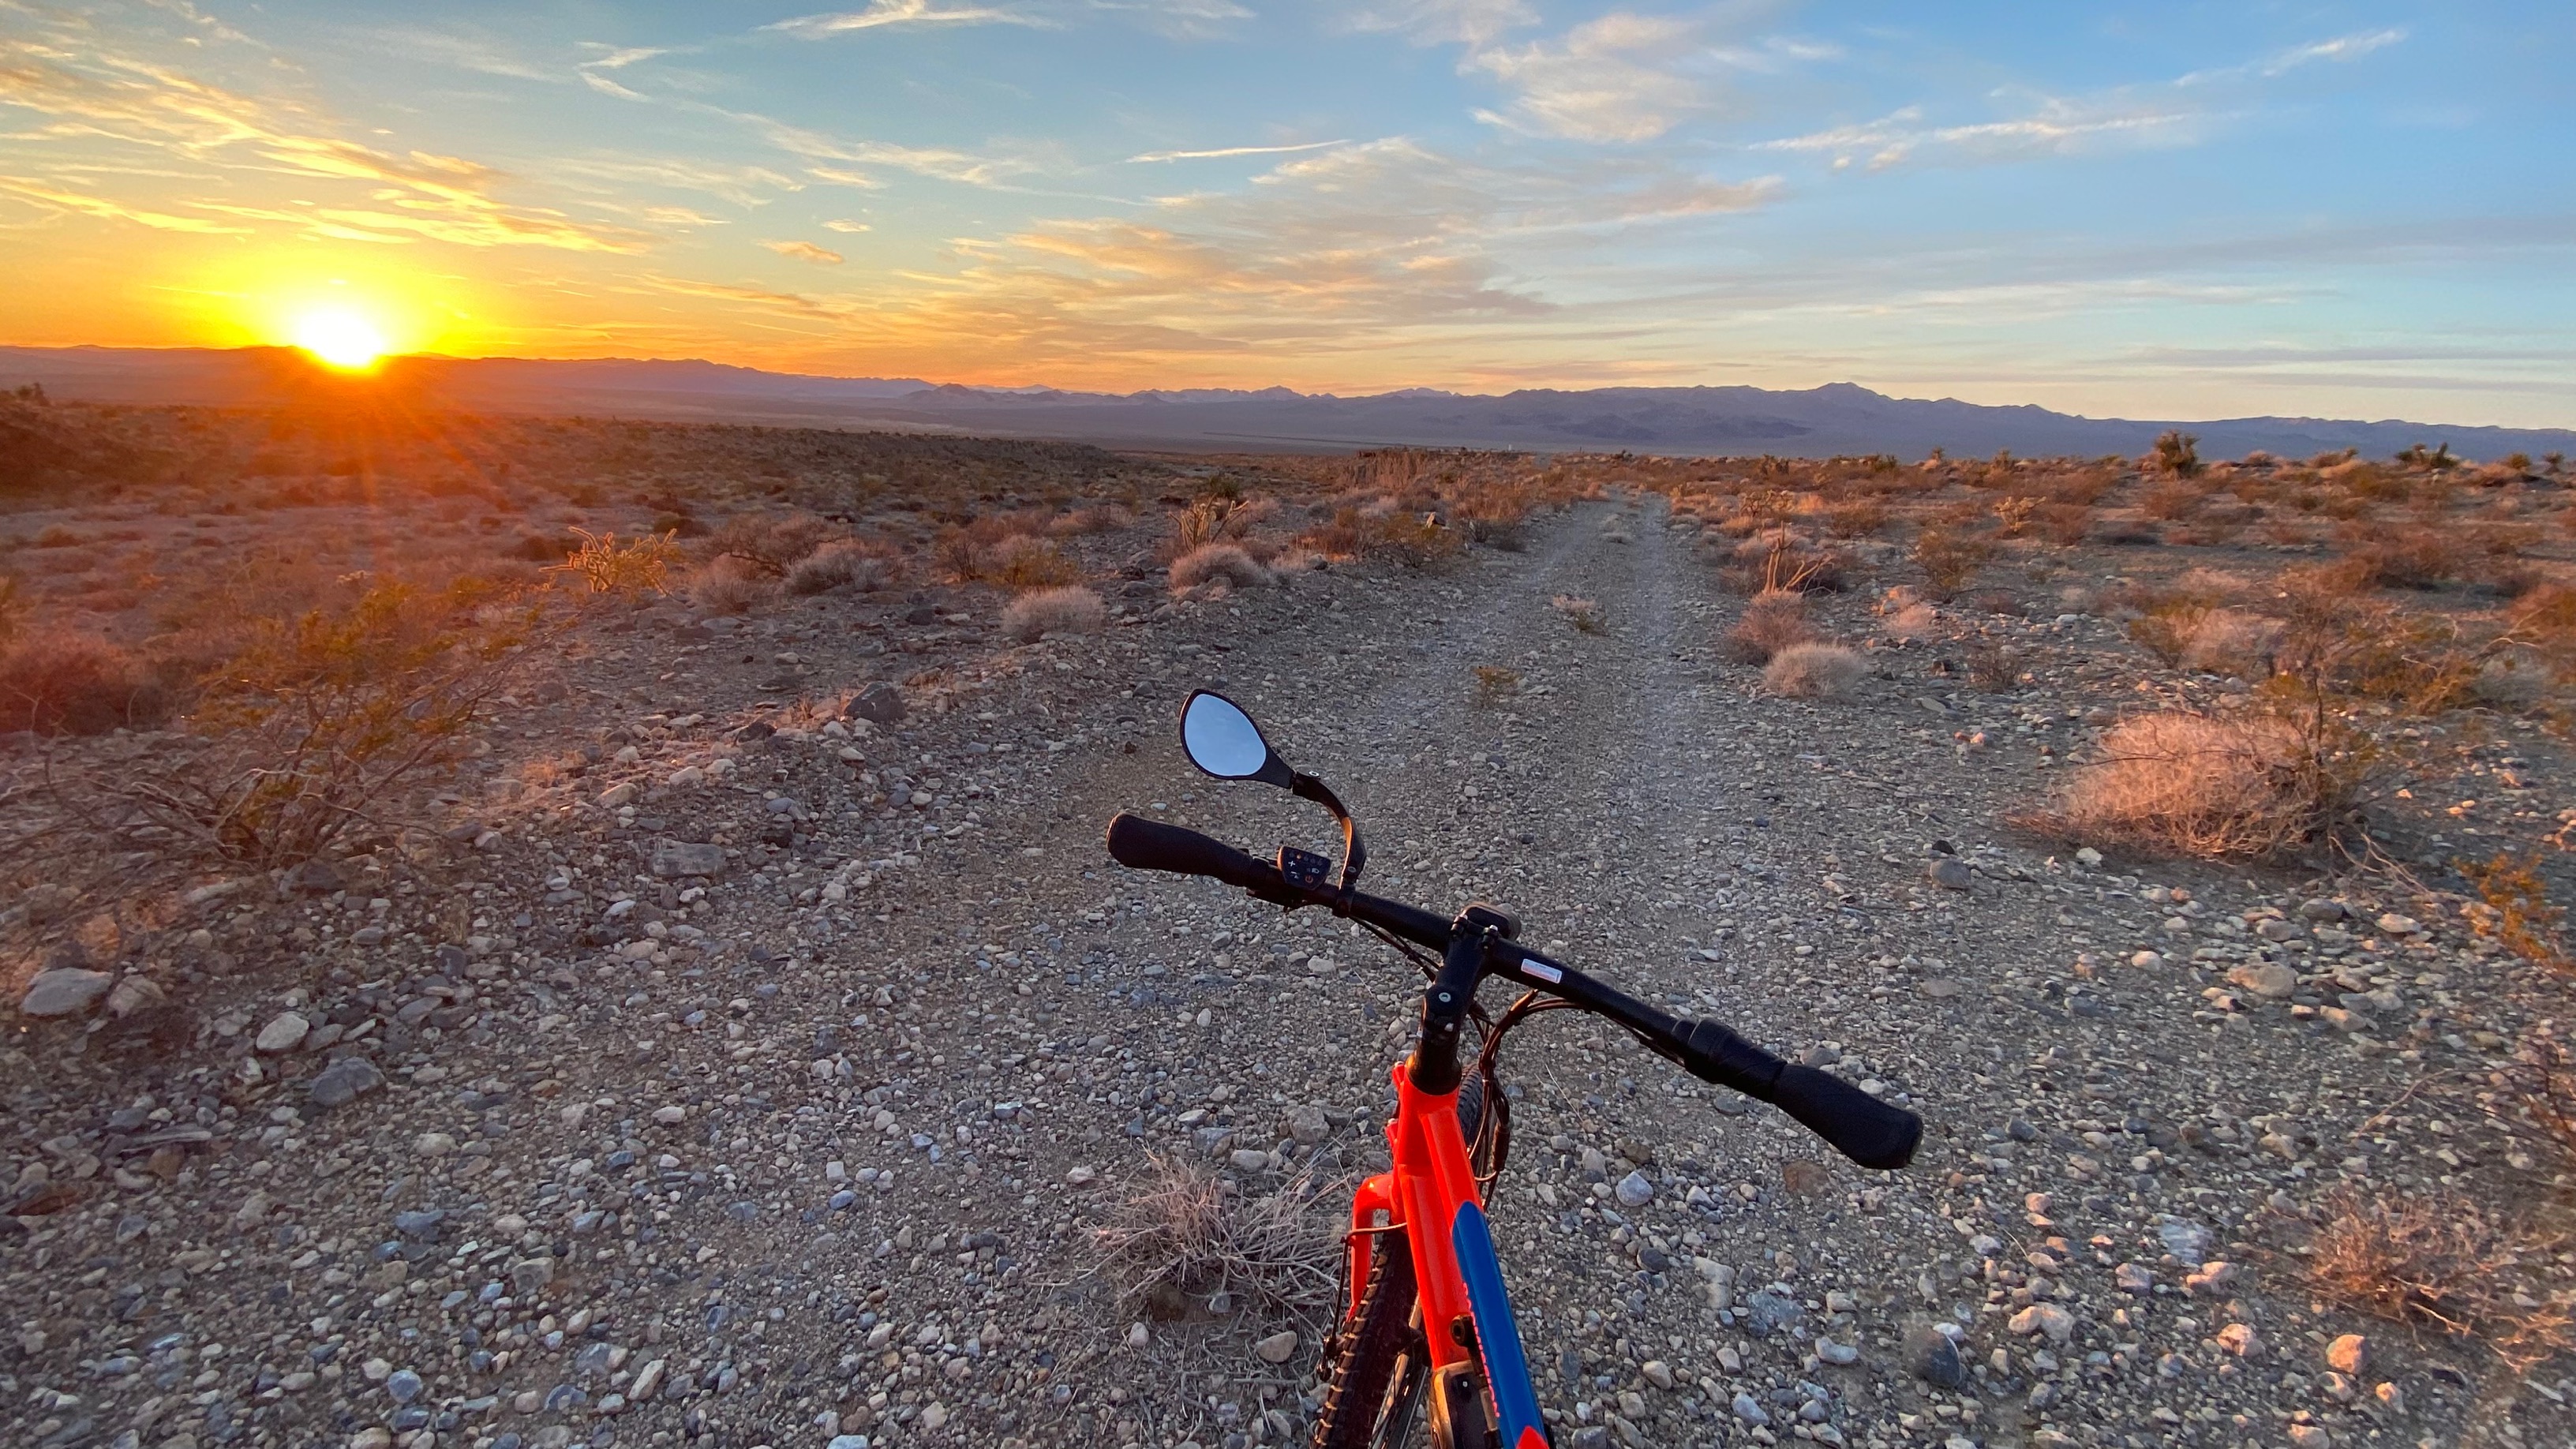 a red bike on a dirt road at sunset